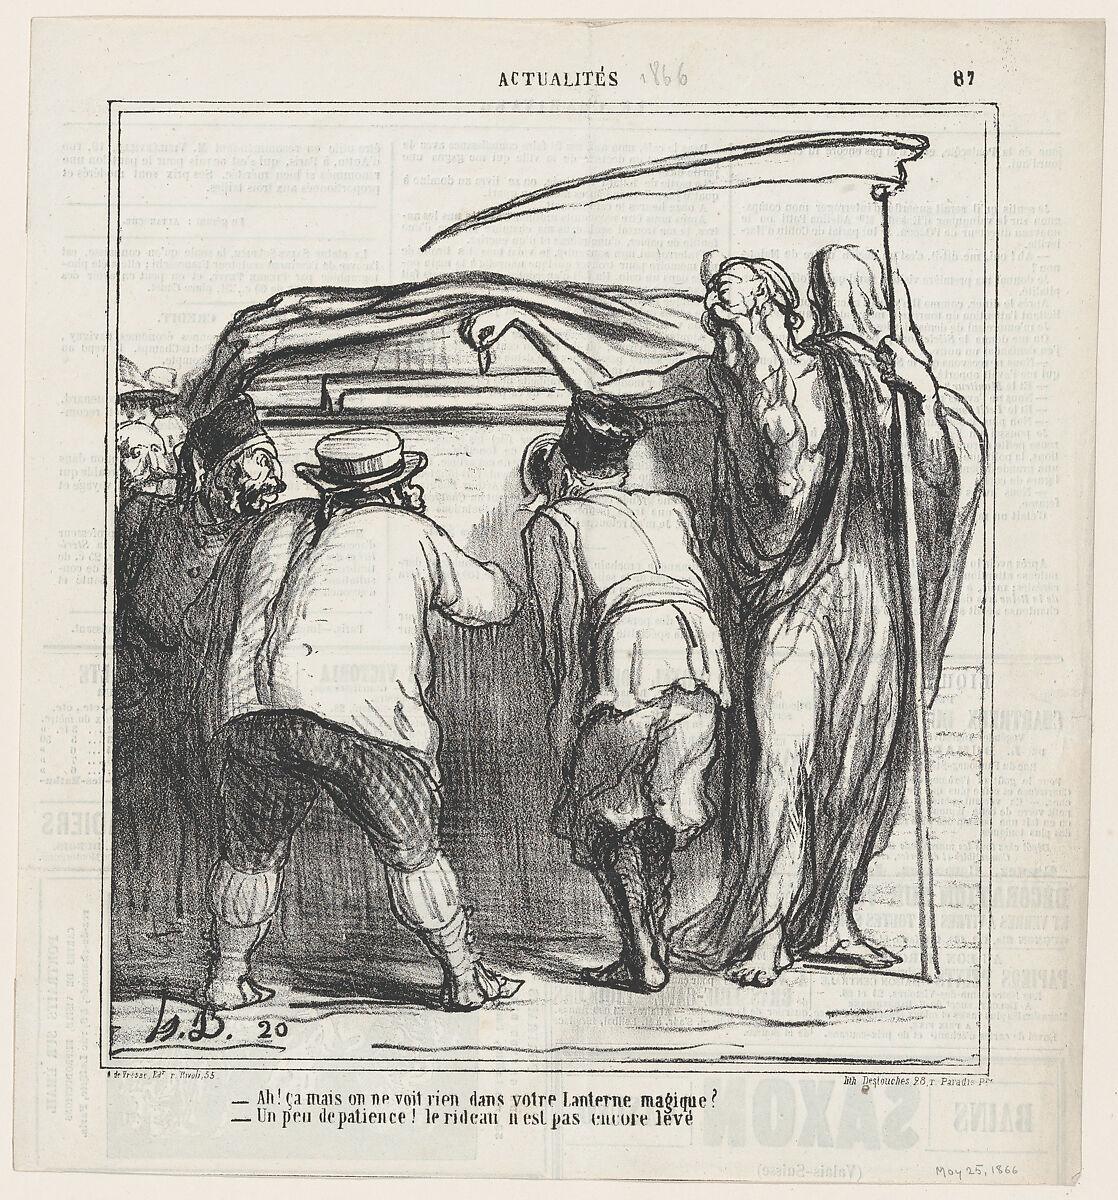 –But look, I don't see a thing in your magic lantern! –Just be a bit more patient... the curtain isn't up yet., from 'News of the day,' published in Le Charivari, May 25, 1866, Honoré Daumier (French, Marseilles 1808–1879 Valmondois), Lithograph on newsprint; second state of two (Hazard & Delteil) 